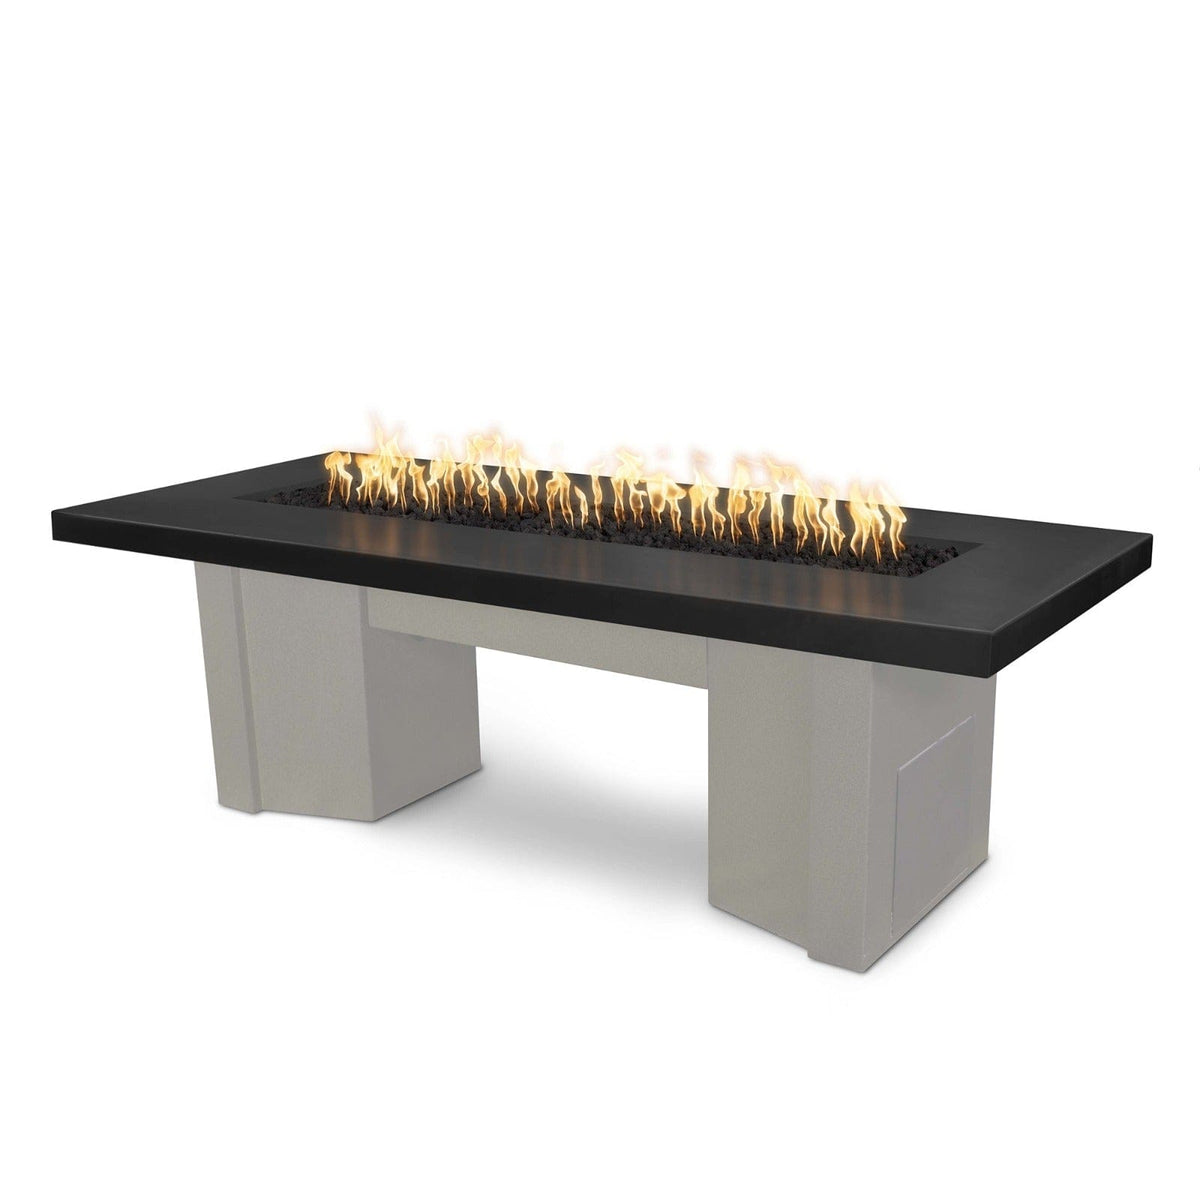 The Outdoor Plus Fire Features Black (-BLK) / Pewter Powder Coated Steel (-PEW) The Outdoor Plus 60&quot; Alameda Fire Table Smooth Concrete in Natural Gas - Flame Sense System with Push Button Spark Igniter / OPT-ALMGFRC60FSEN-NG